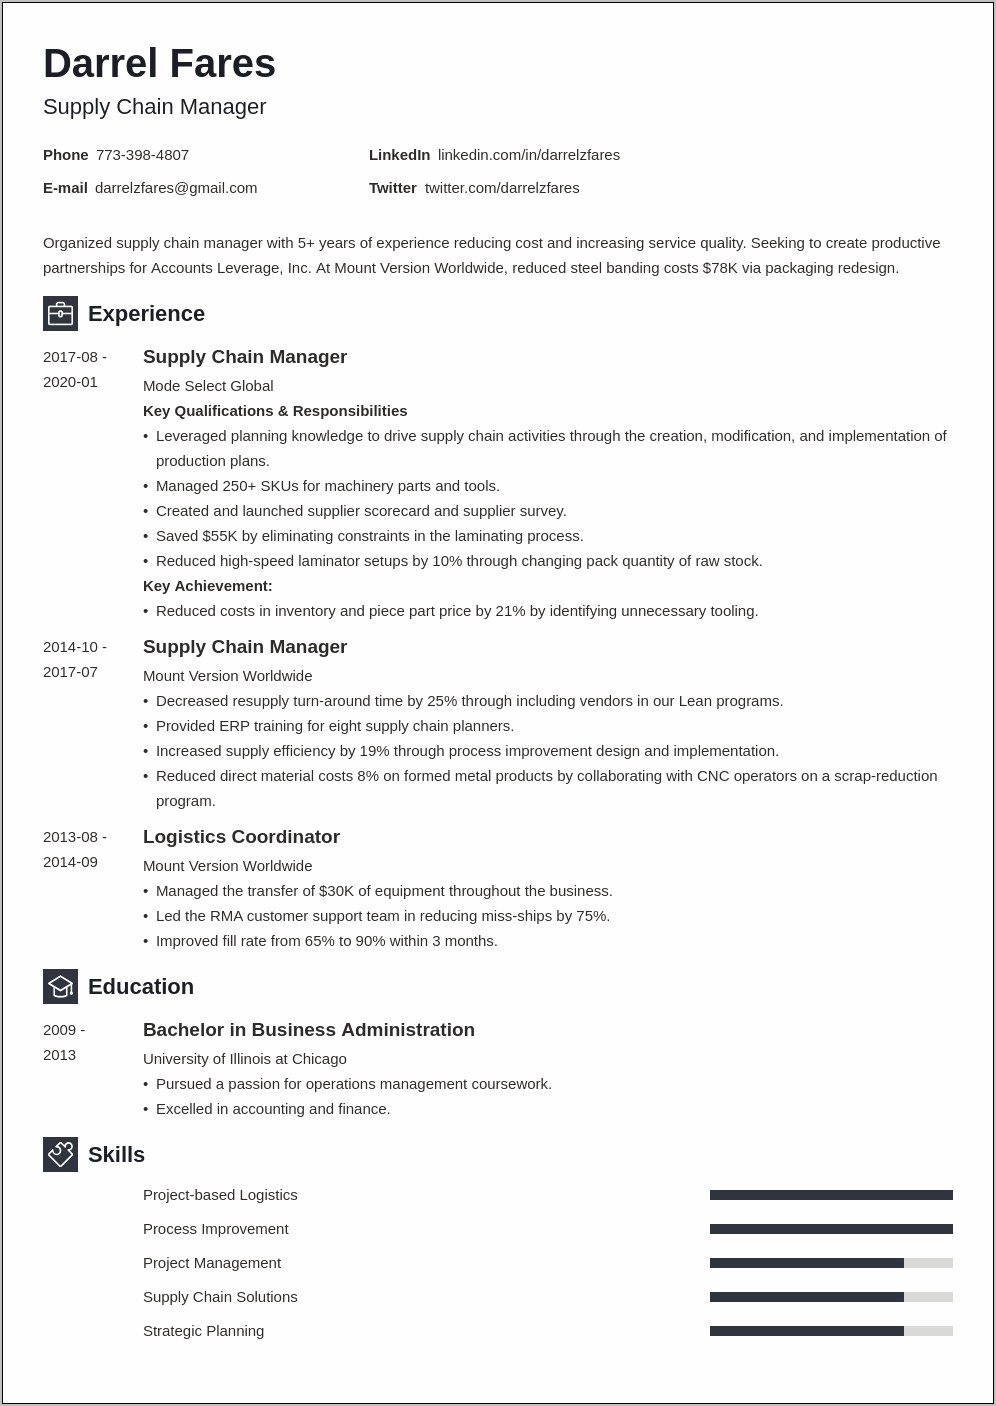 Business Analyst Resume With Supply Chain Management Experience